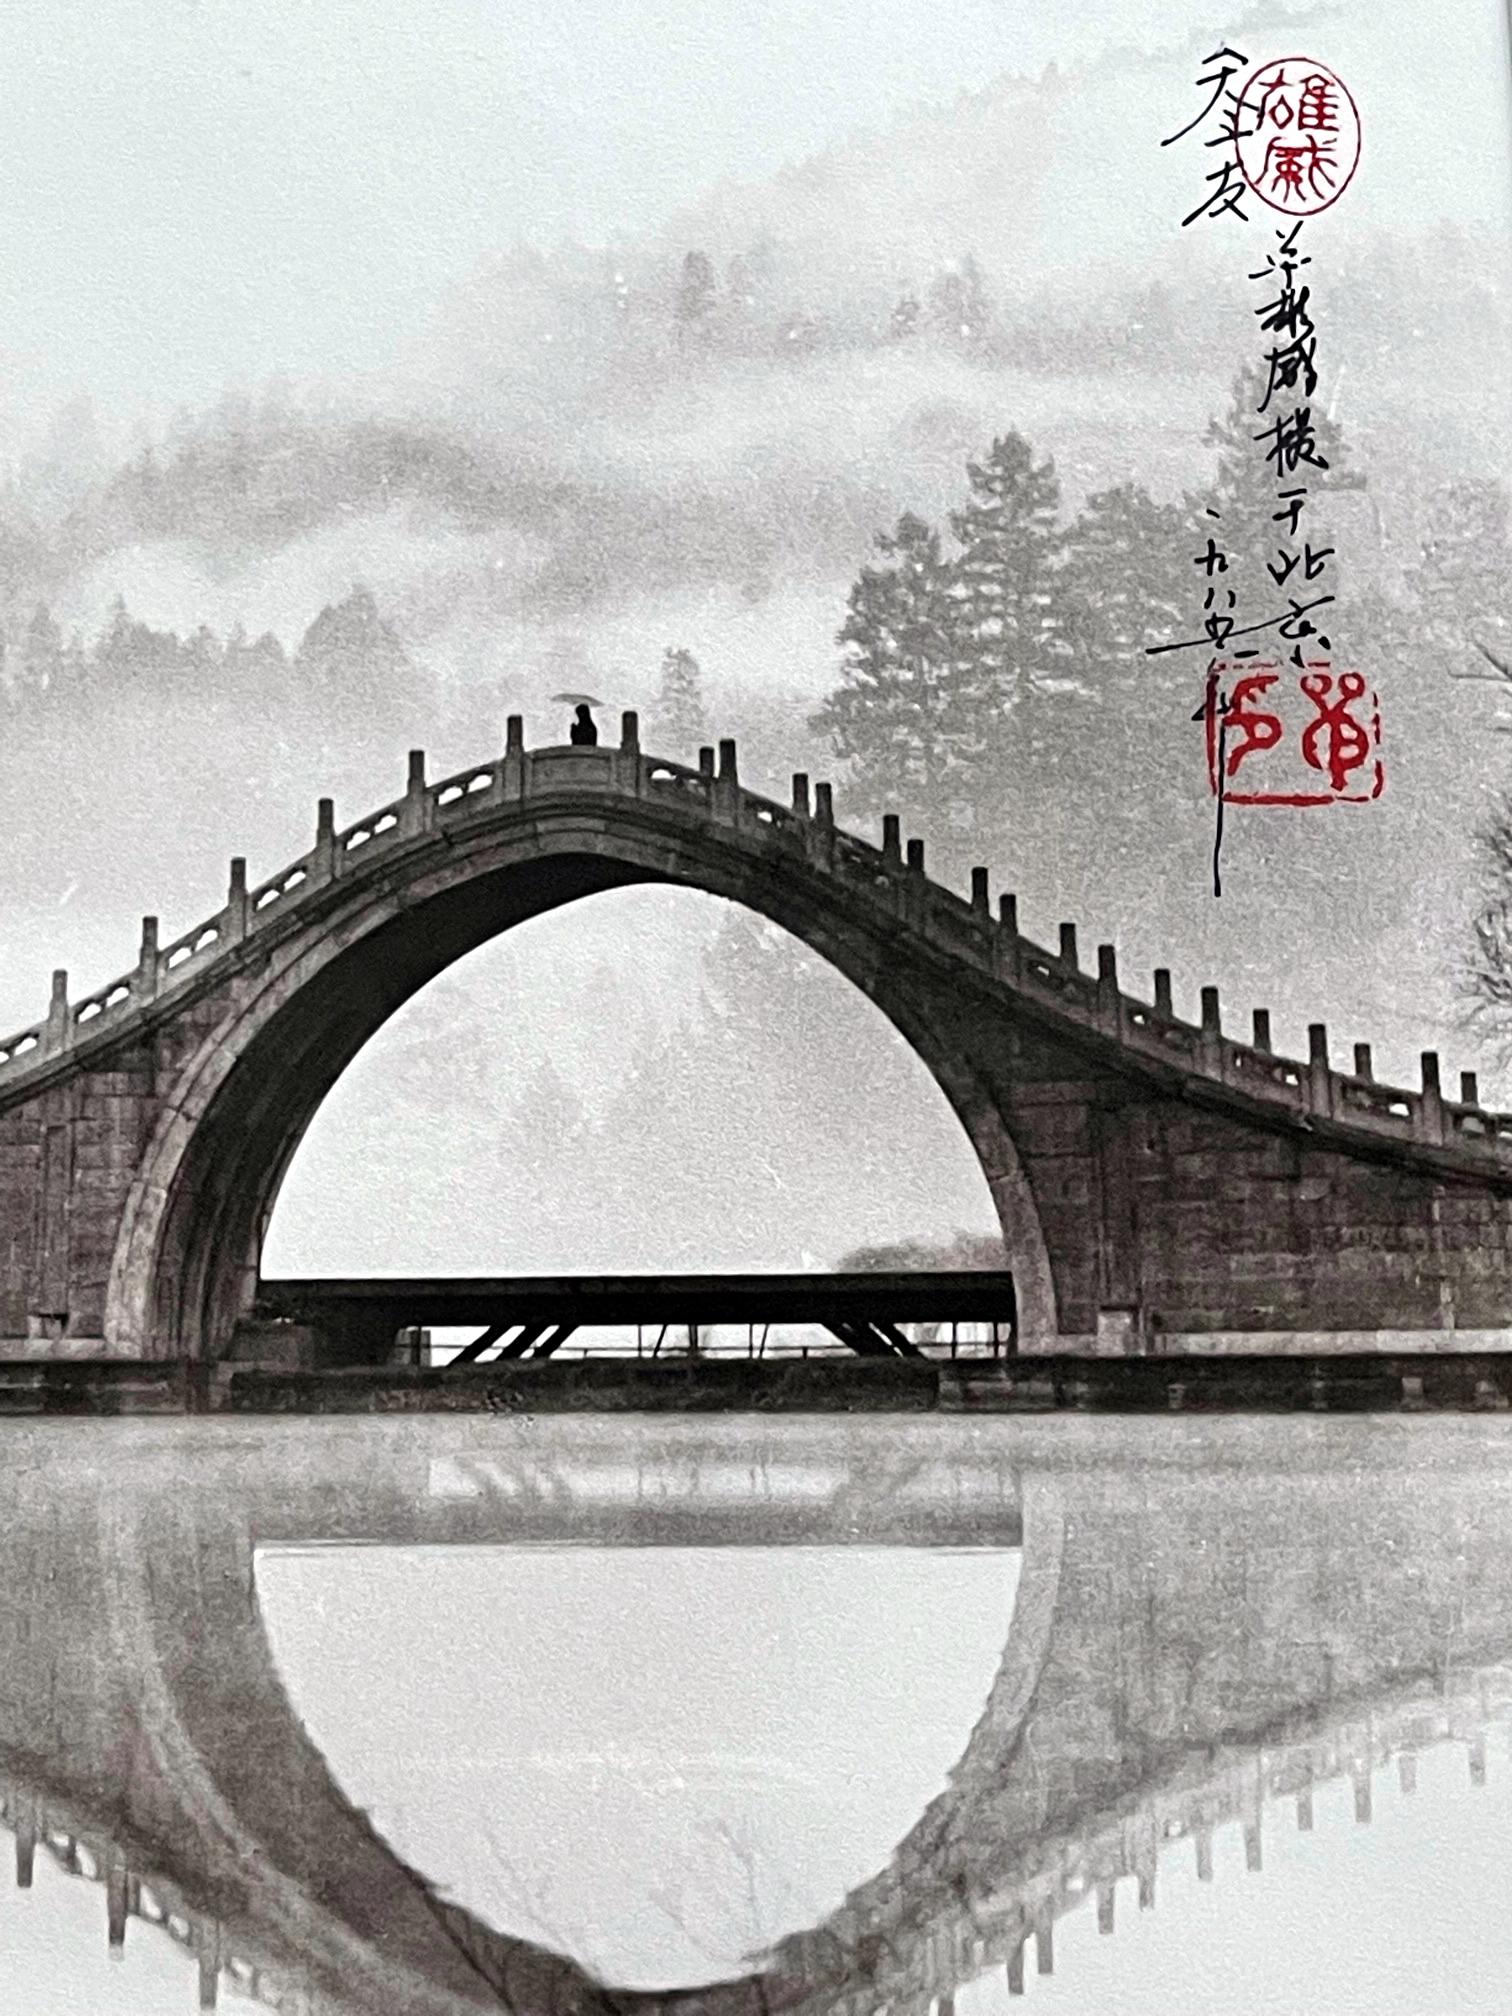 Framed Photograph by Don Hong-Oai In Good Condition For Sale In Atlanta, GA